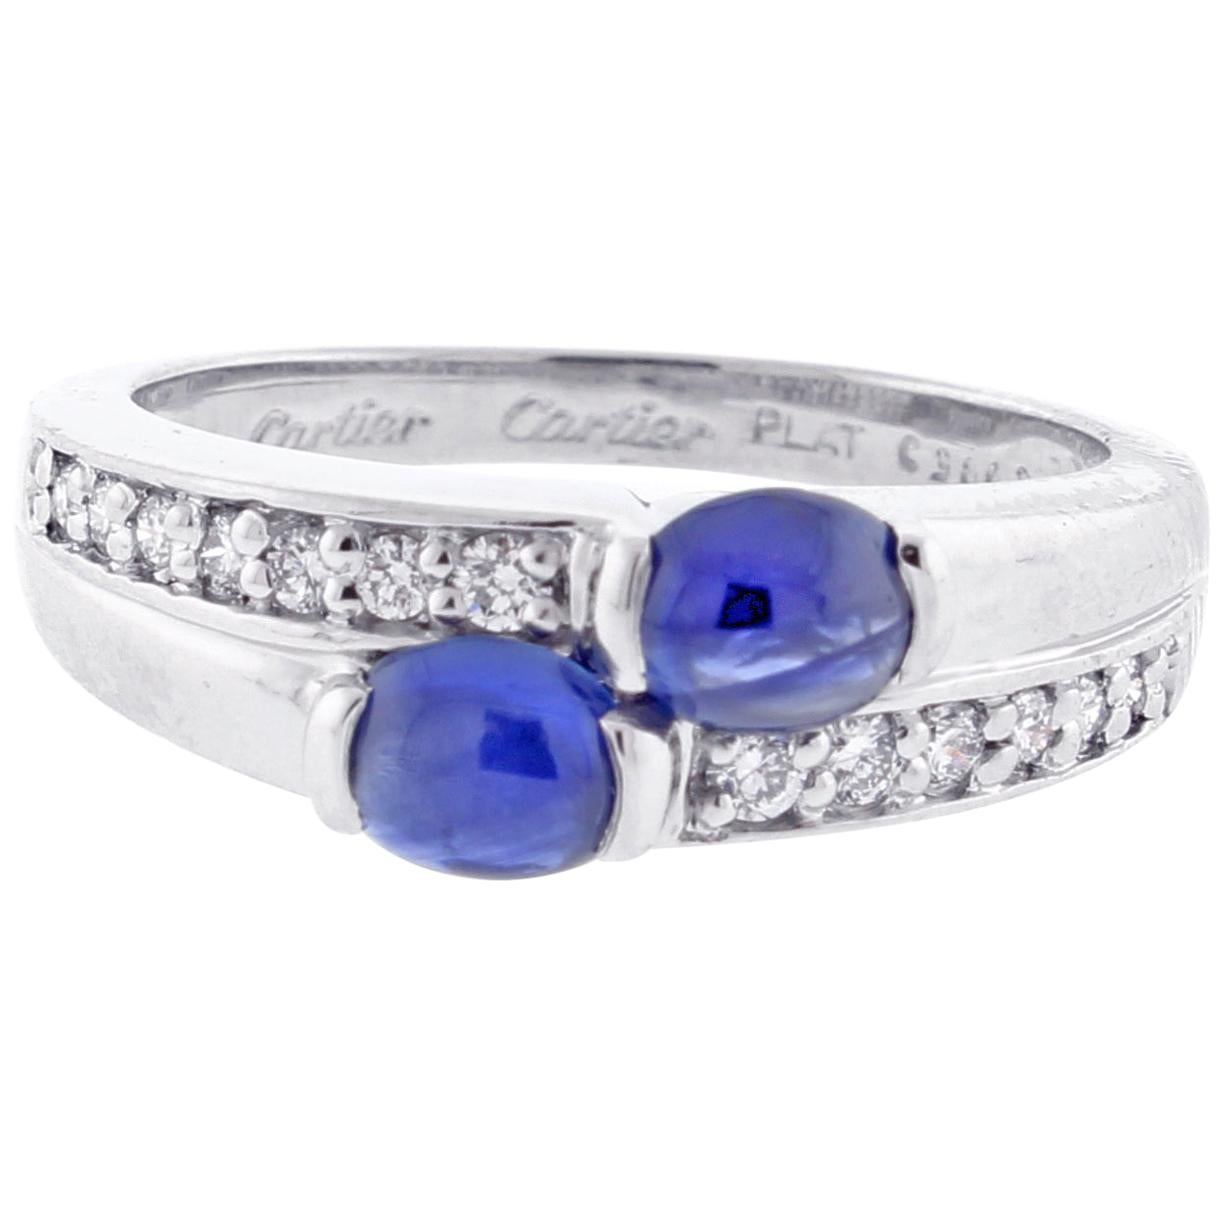 Cartier Twin Cabochon Sapphire and Diamond Ring